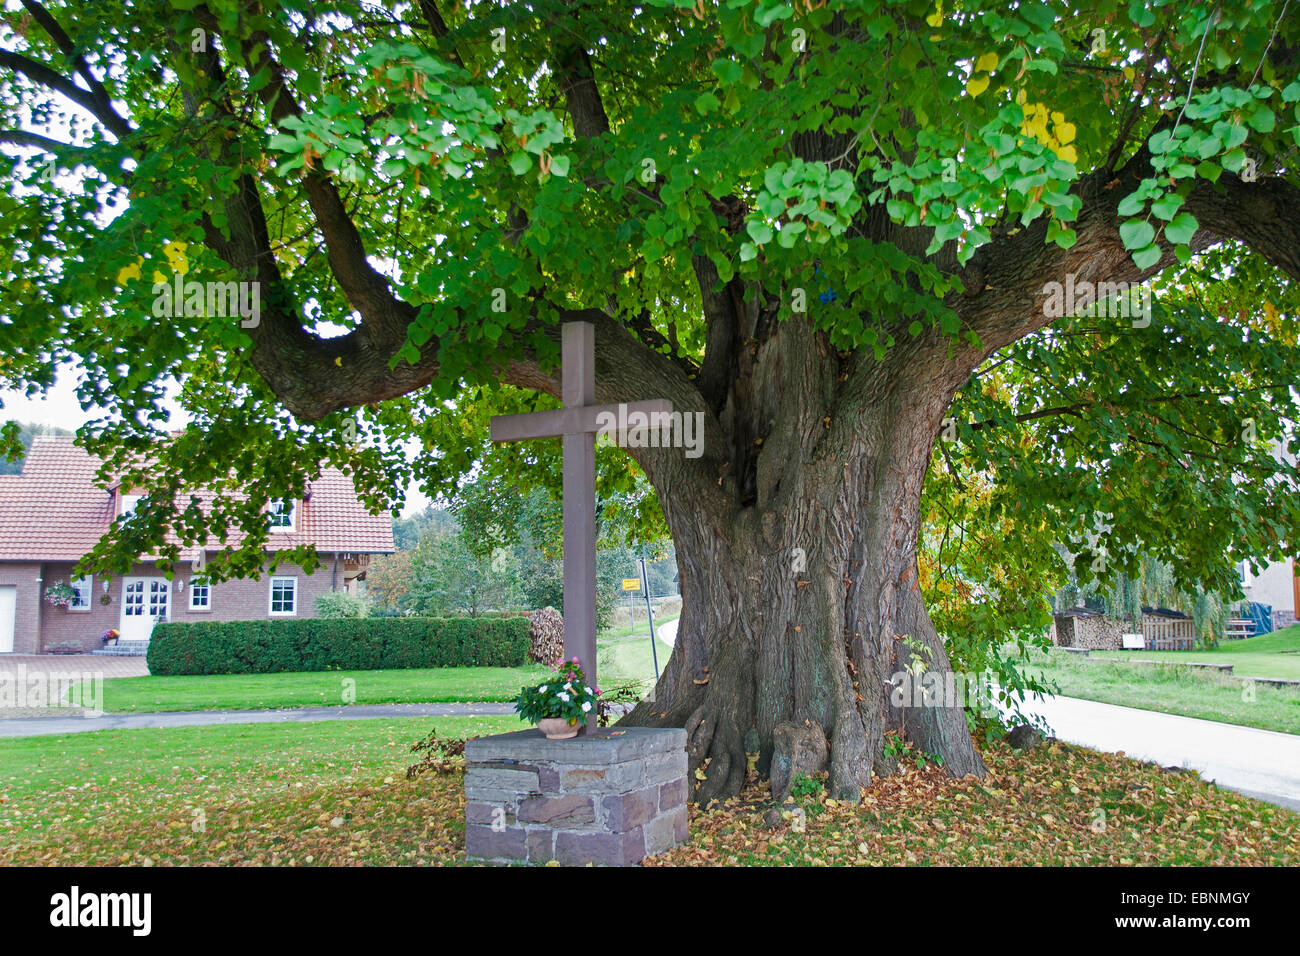 basswood, linden, lime tree (Tilia spec.), 350 years old lime tree, Teich-Linde in Herstelle in North Rhine-Westphalia, Germany, North Rhine-Westphalia, Herstelle Stock Photo